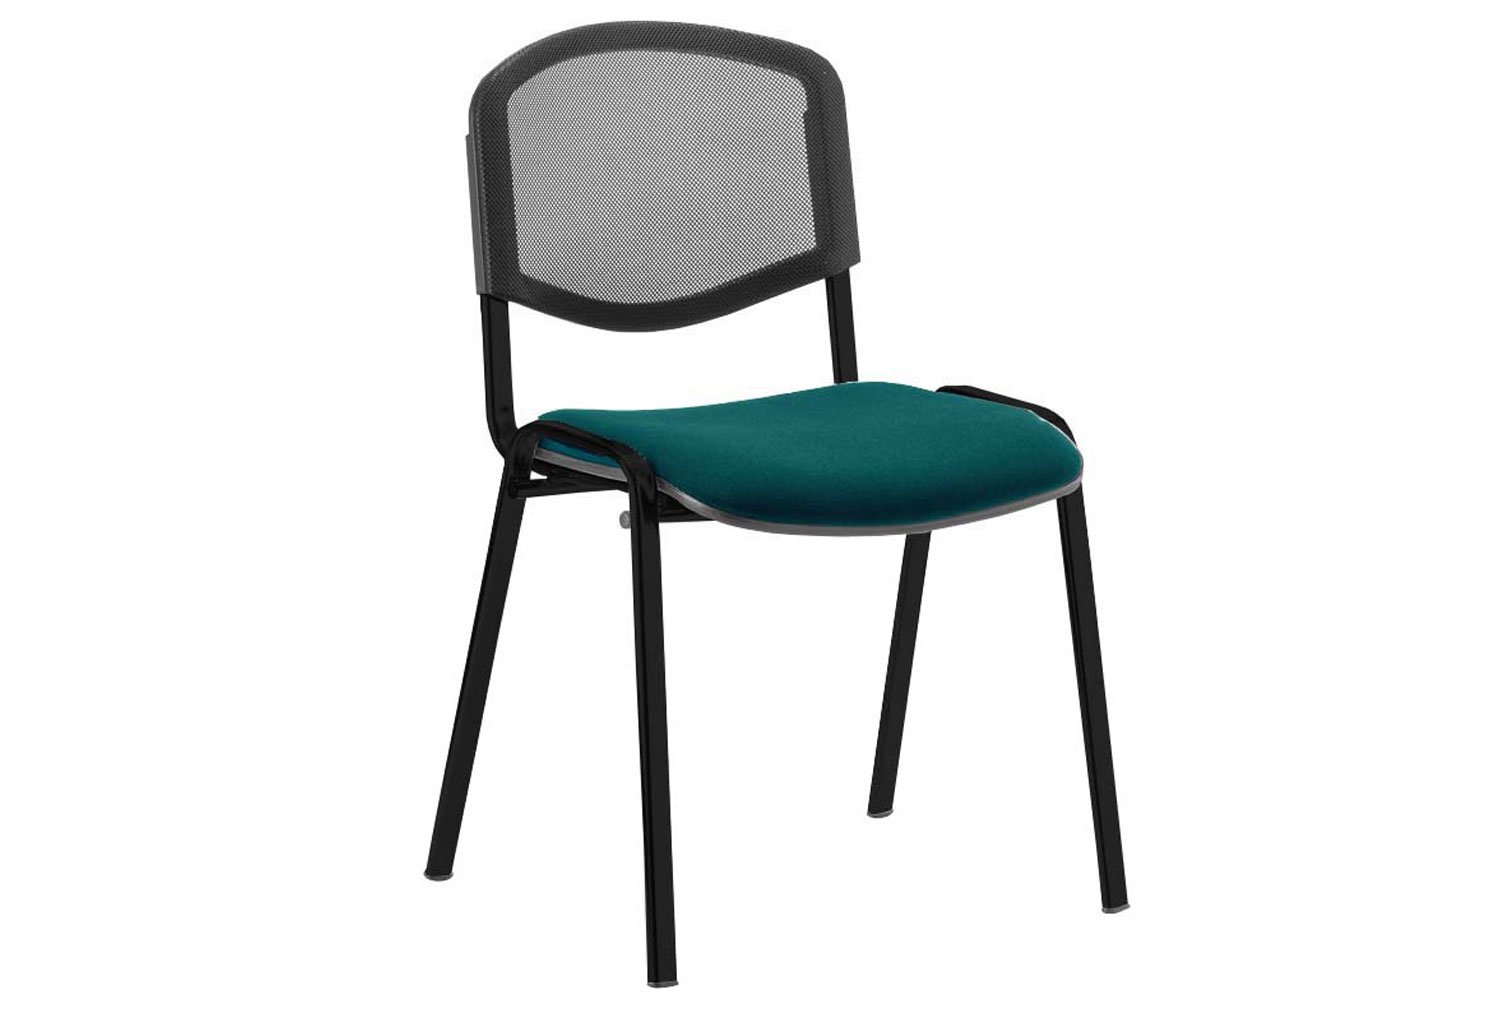 Qty 4 - ISO Black Frame Mesh Back Conference Office Chair (Maringa Teal)